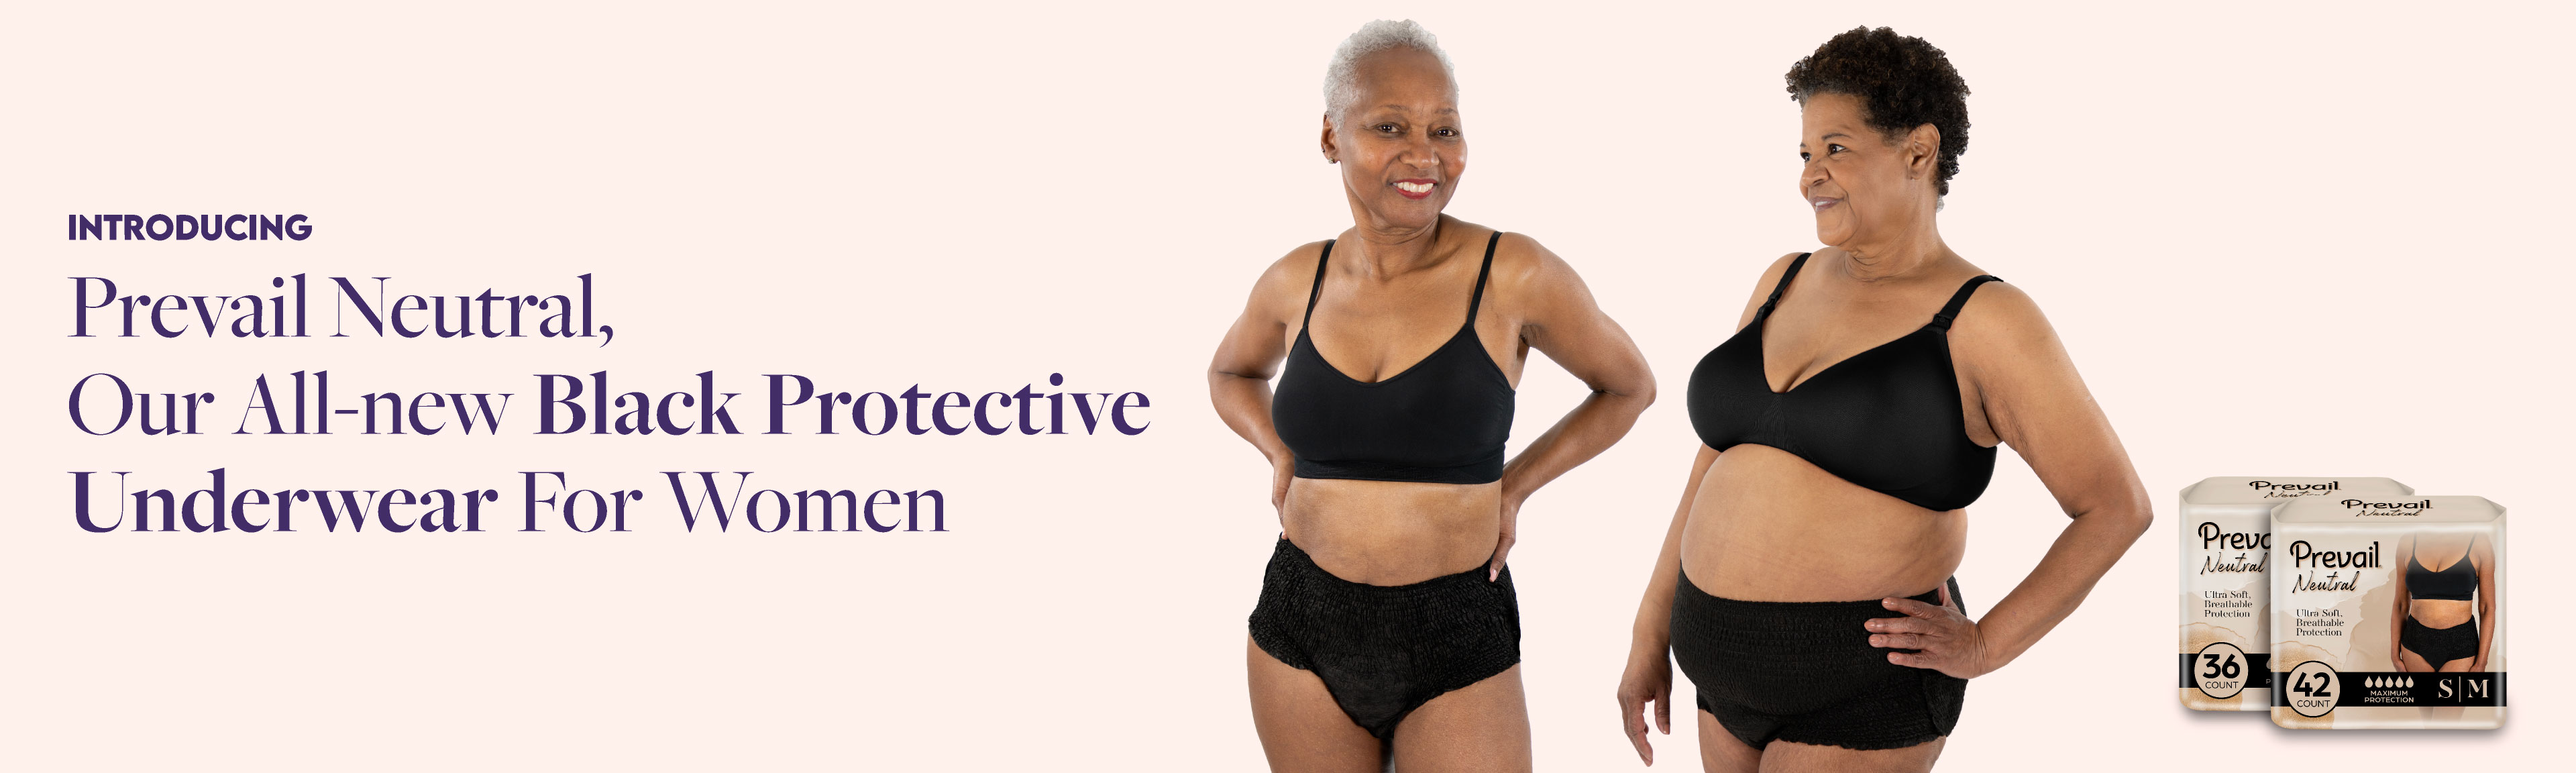 Introducing Prevail Neutral, Our All-new Black Protective Underwear For Women